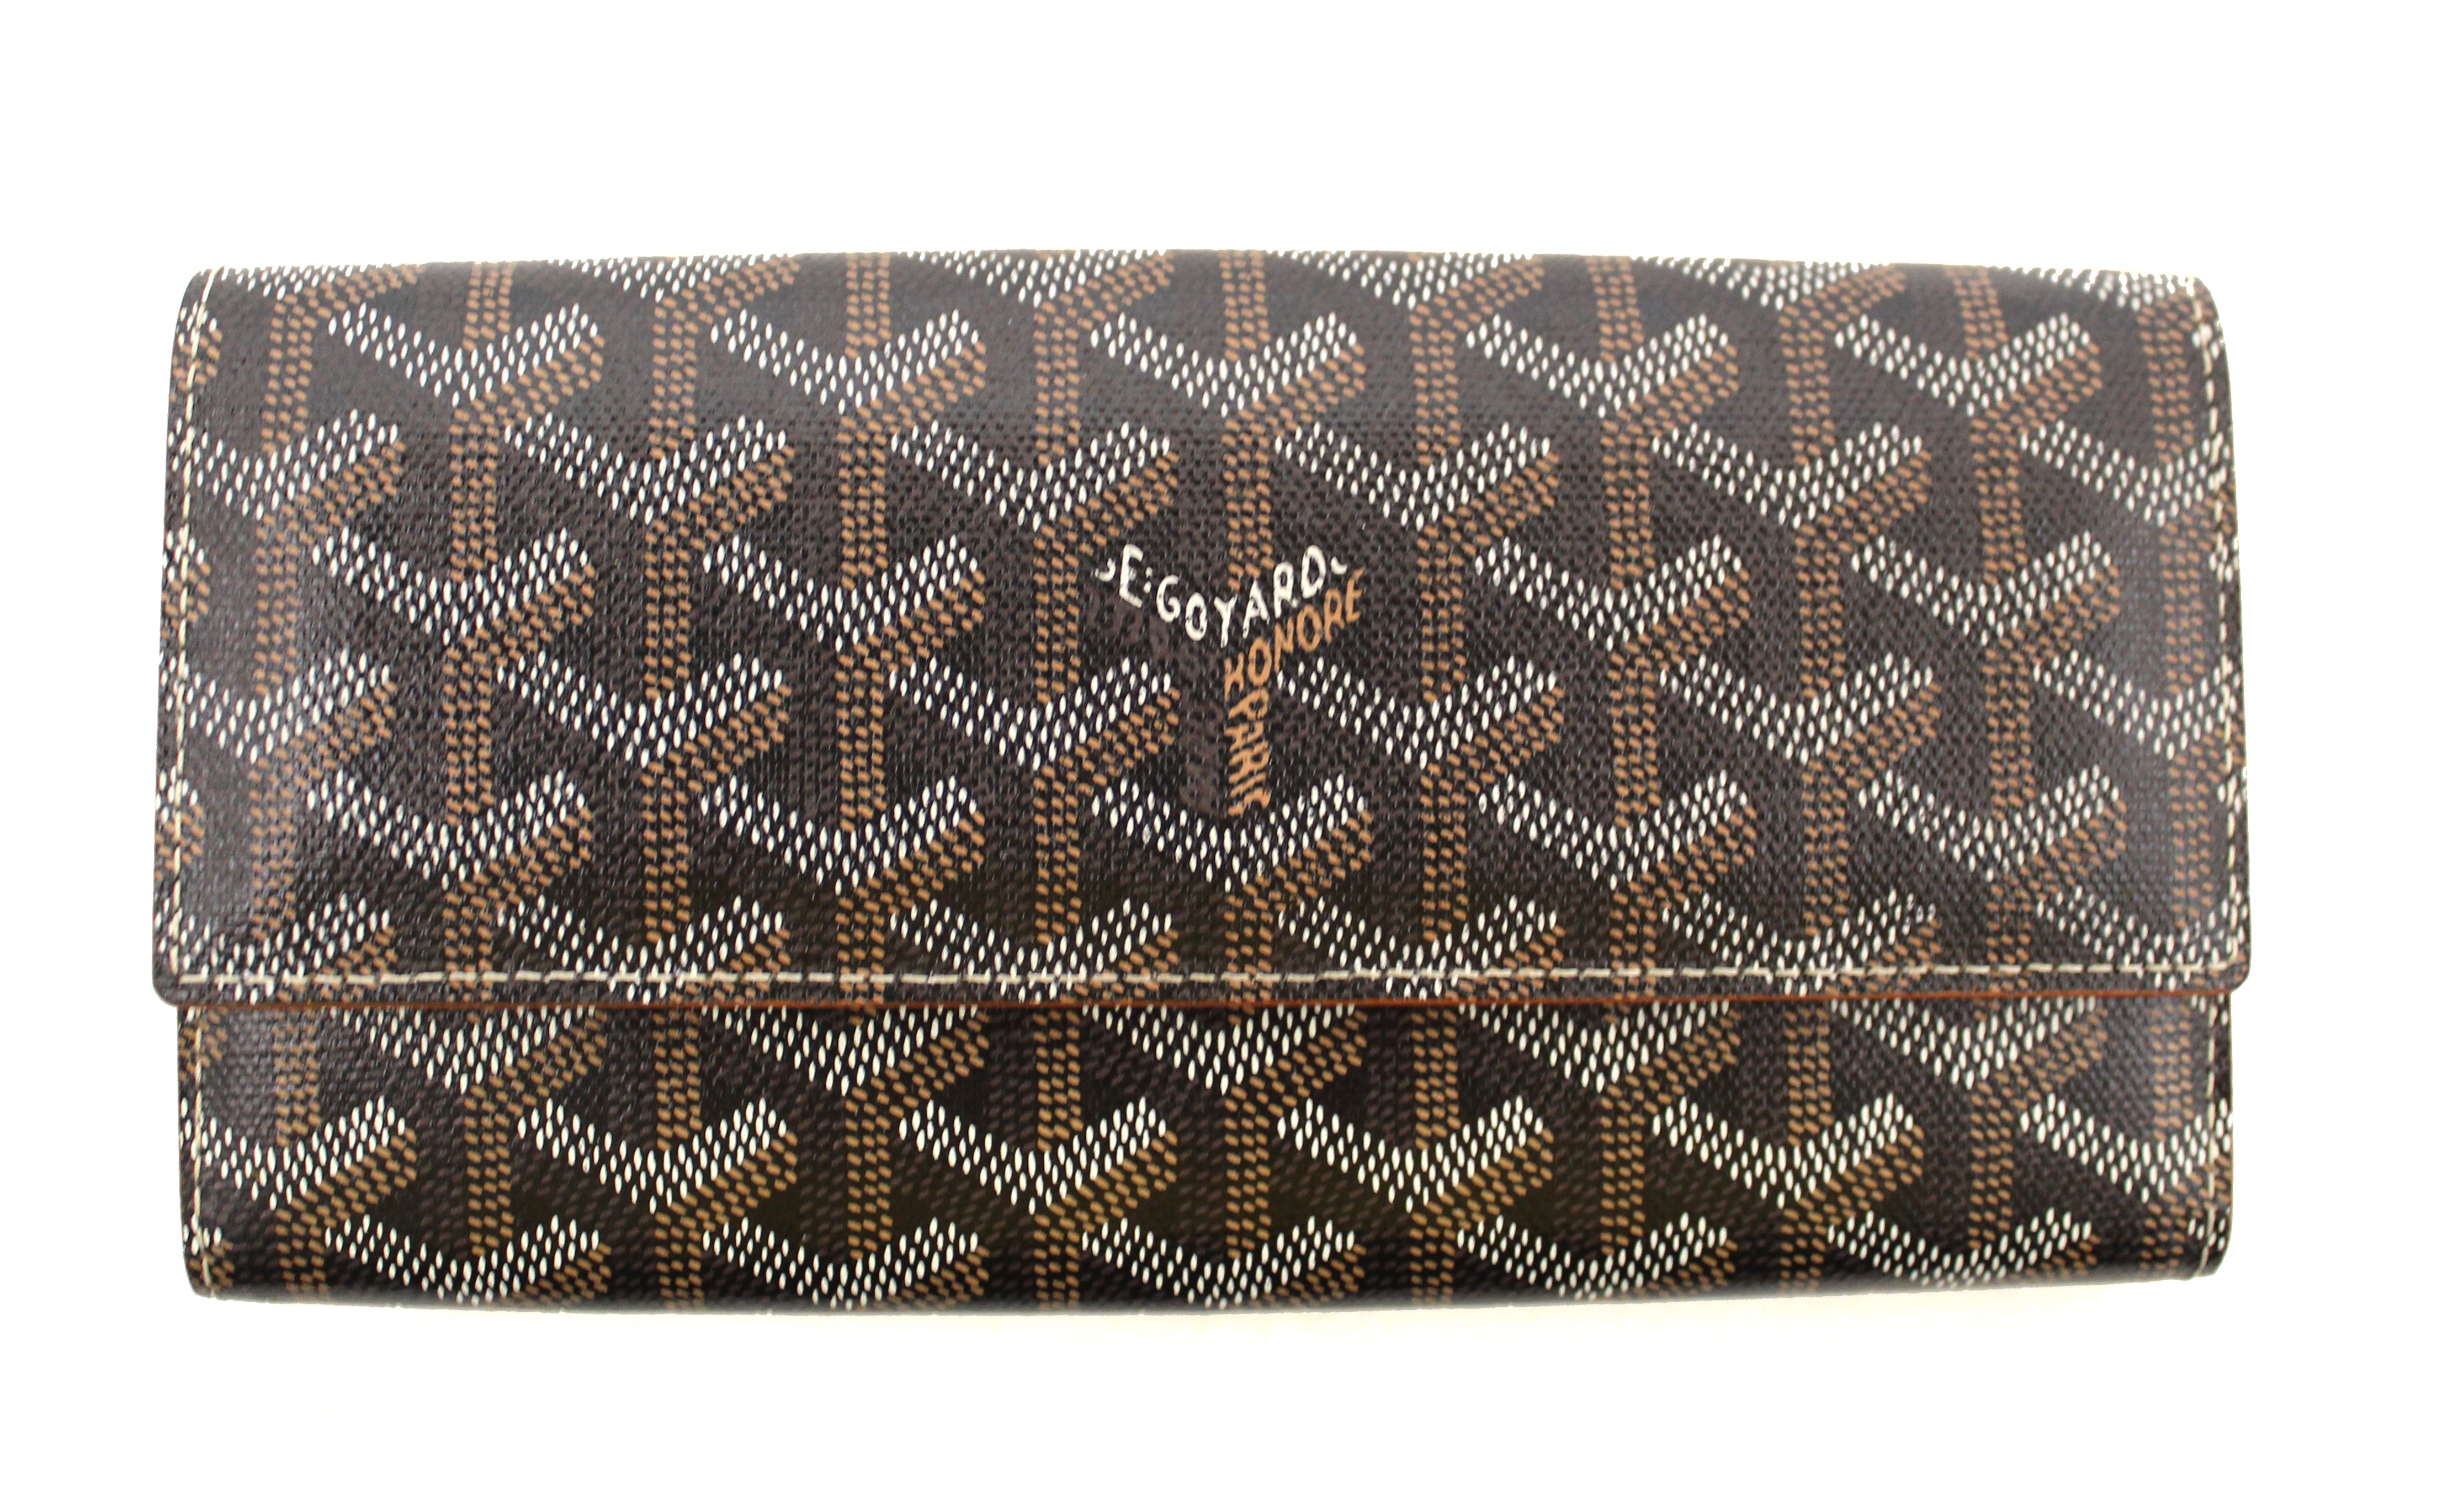 Goyard Black Goyardine Coated Canvas Varenne Continental Wallet For Women  are one of our latest products on